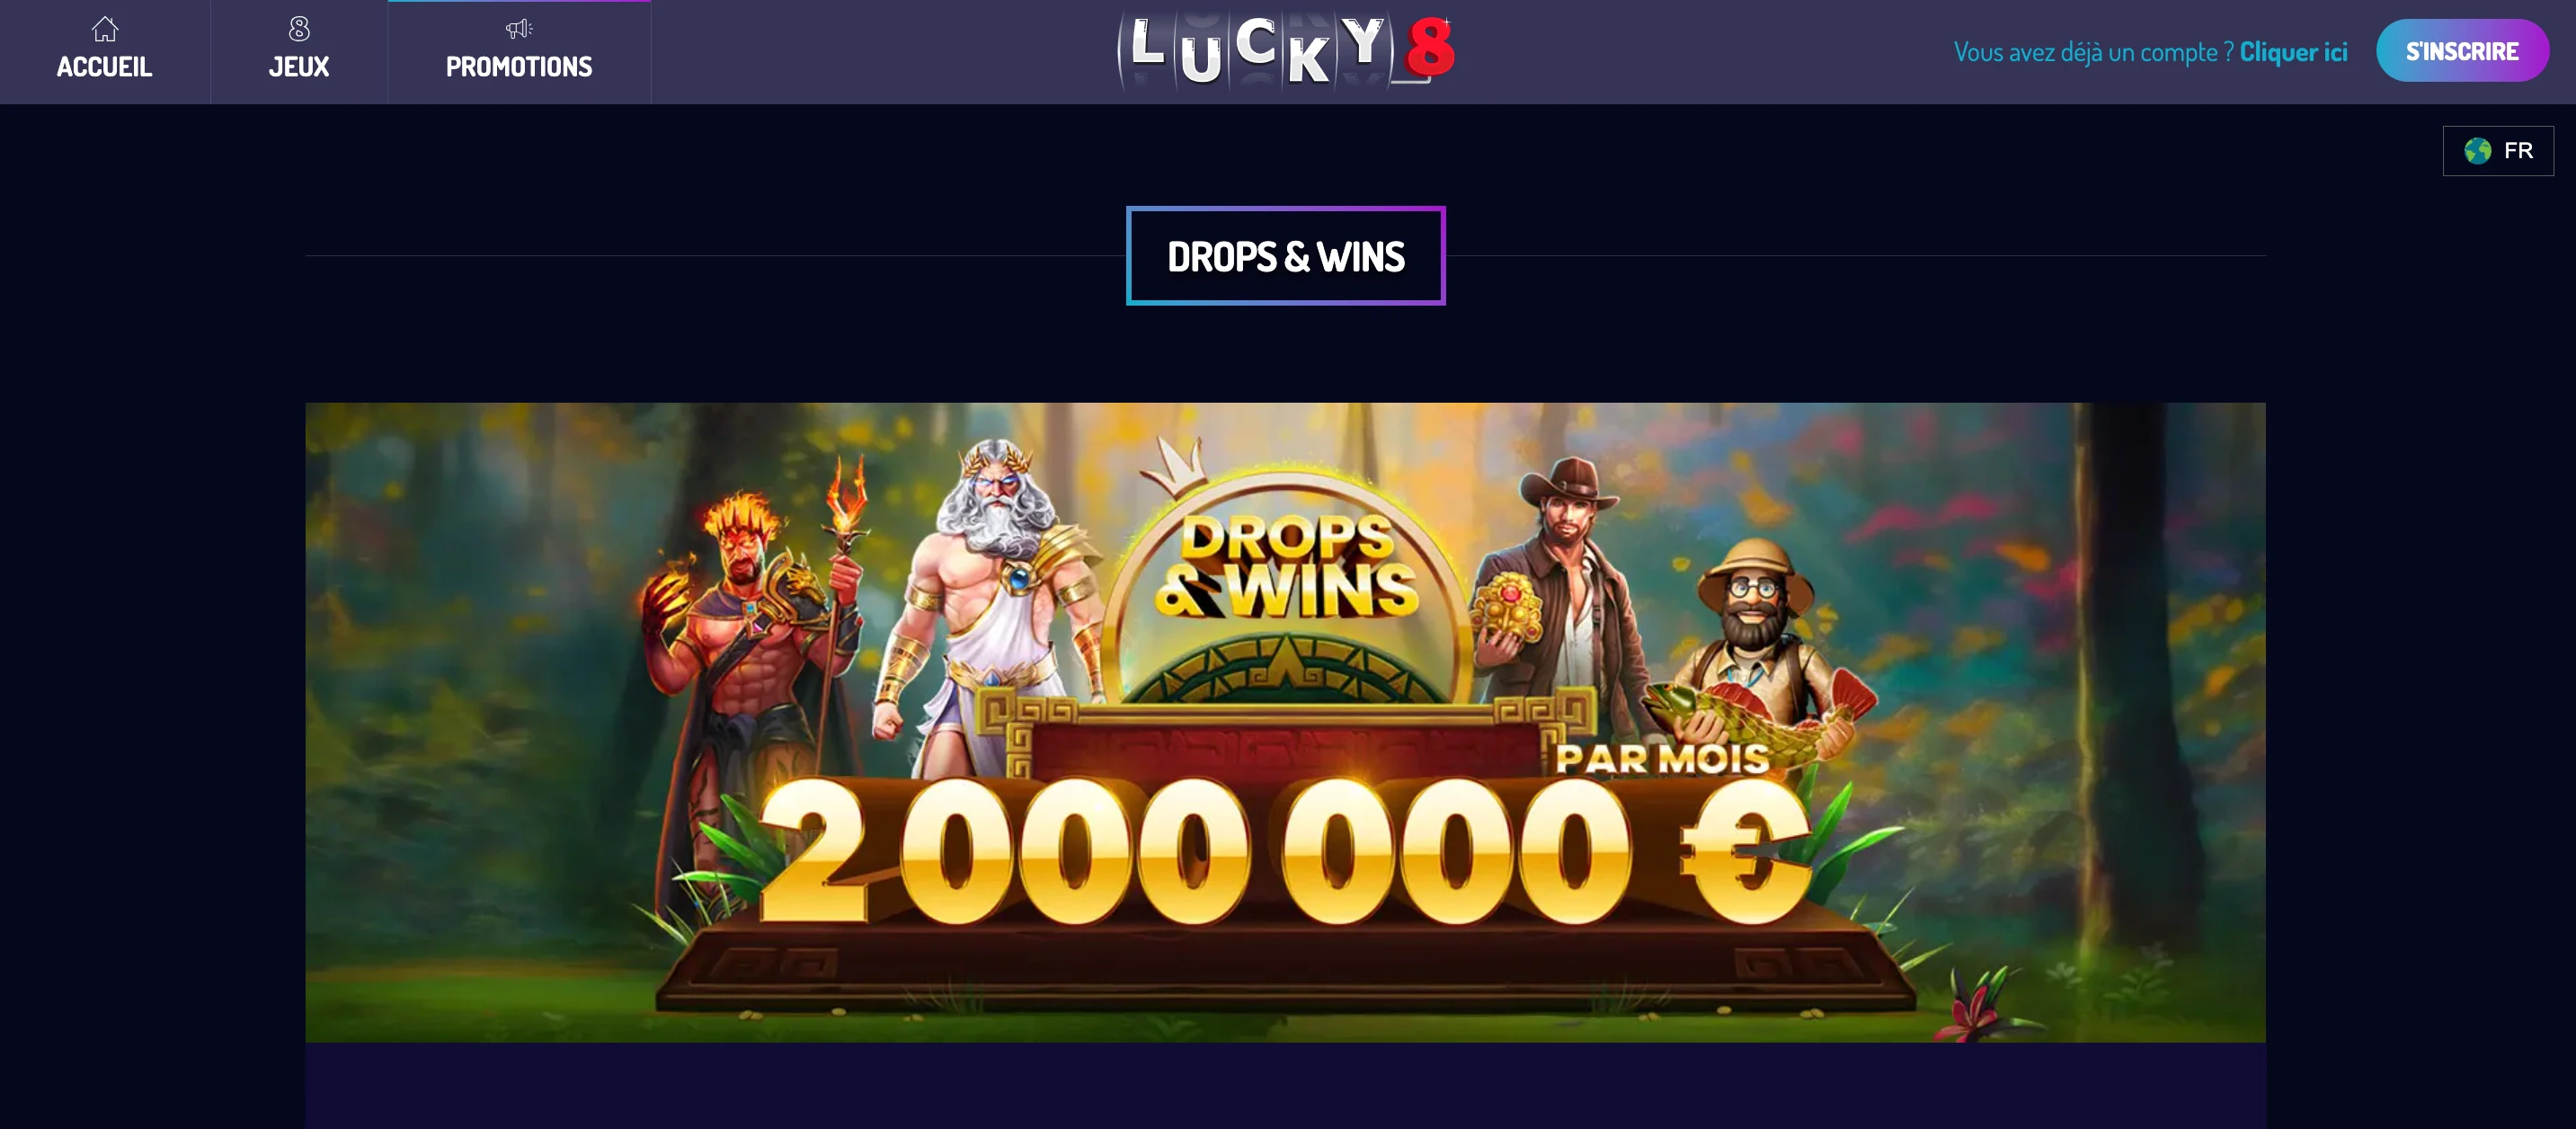 drops & wins lucky8